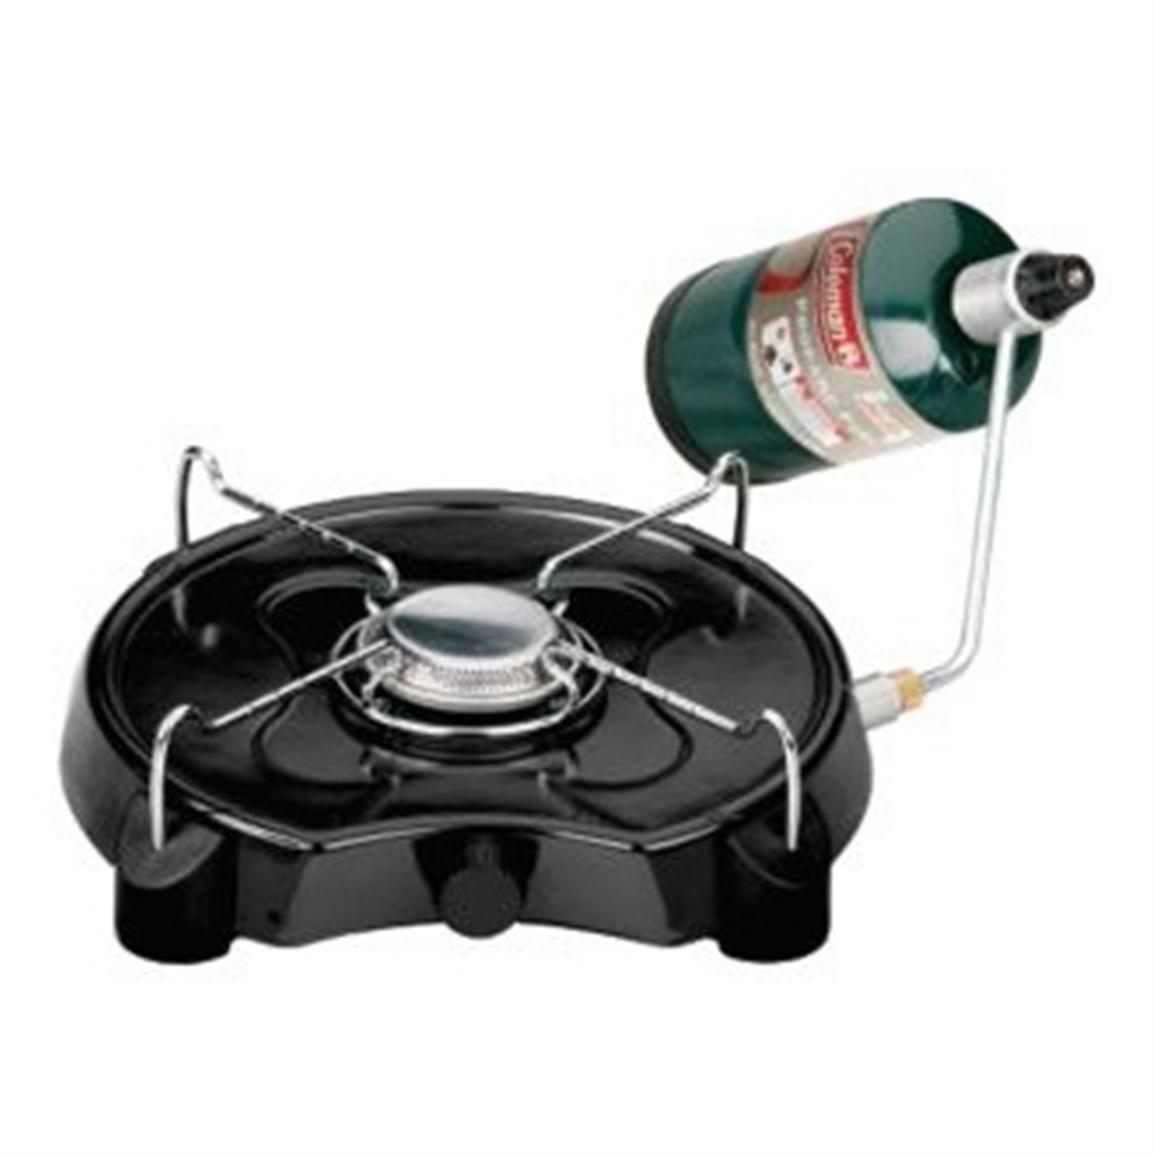 New Coleman 1 Burner Stove for Small Space